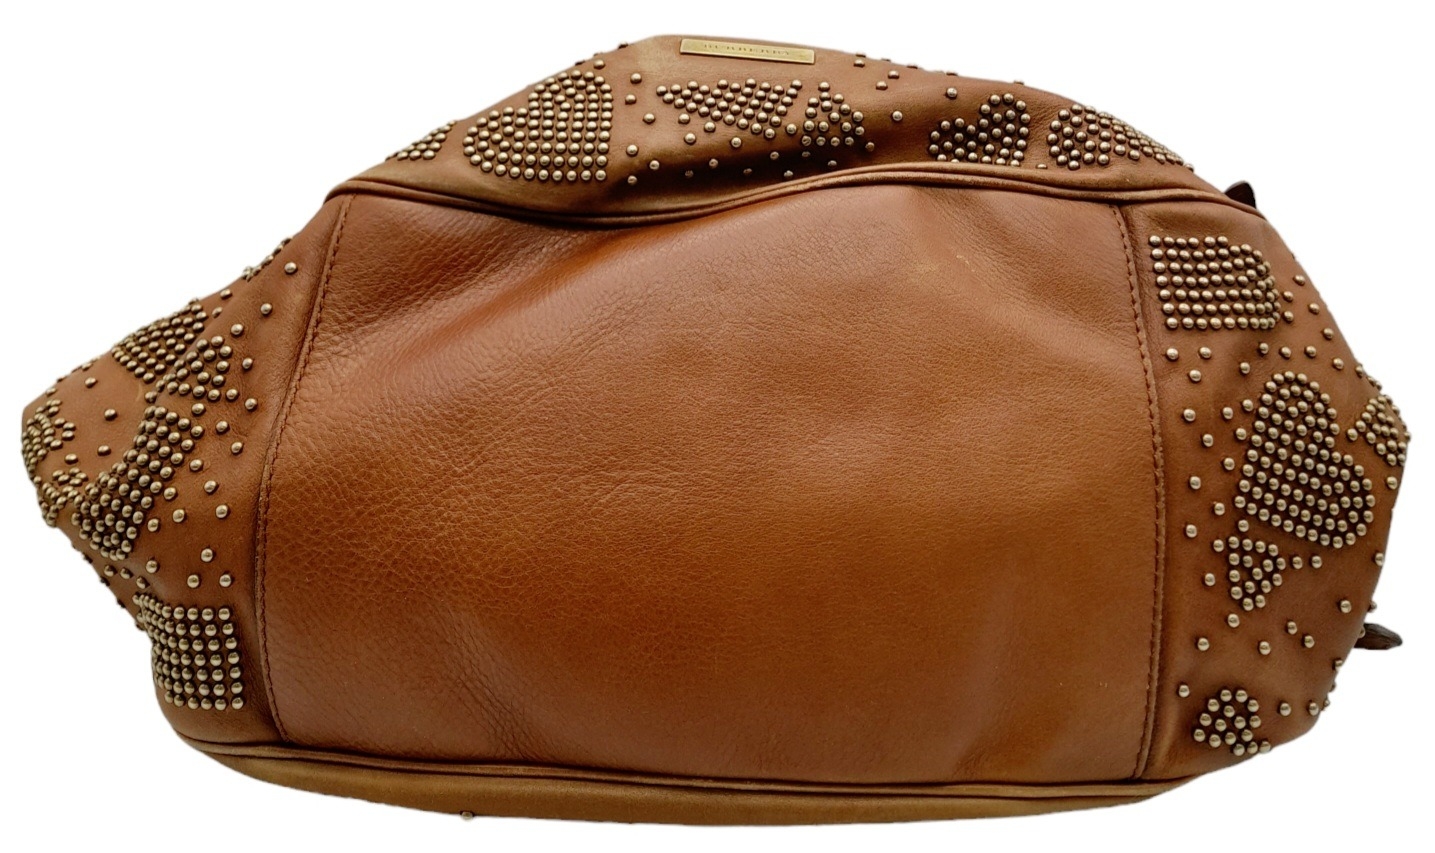 A Burberry Tan Studded Heart Hobo Bag. Leather exterior with stud embellishments, golden-toned - Image 6 of 8